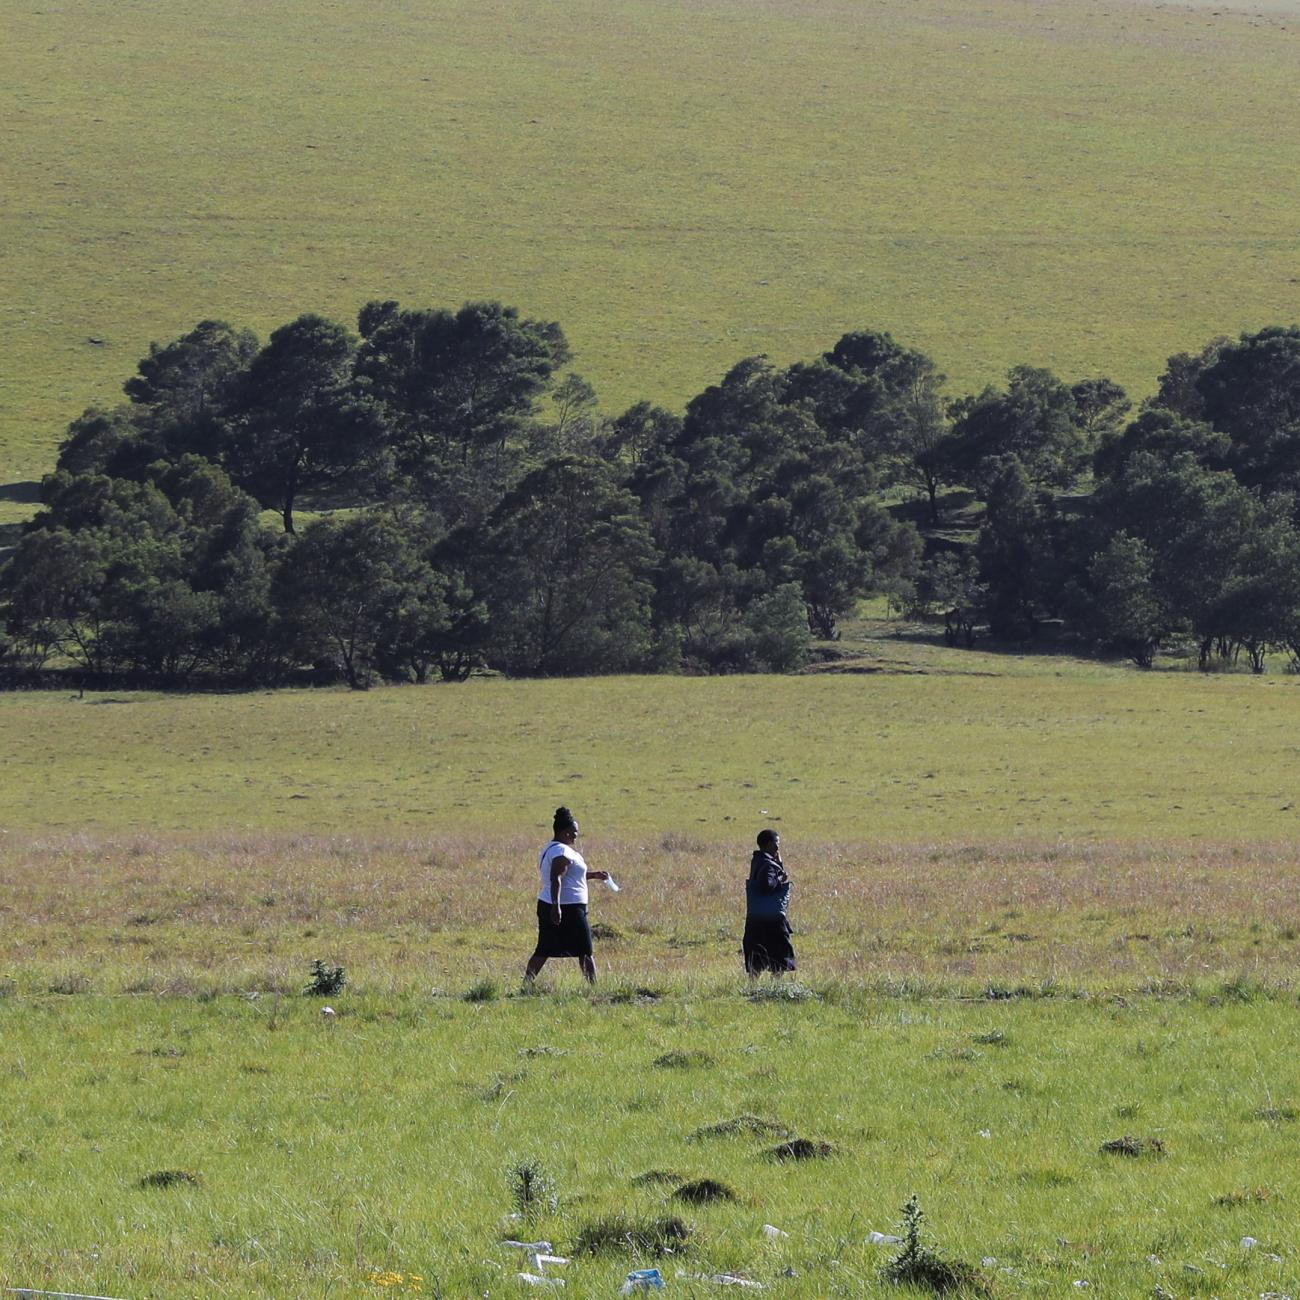 A green field and trees are the backdrop as two women walk, holding a face mask, in Dutywa, in the Eastern Cape province, South Africa, on November 29, 2021. News of the new COVID Omicron variant, now spreading in South Africa, was announced this week.